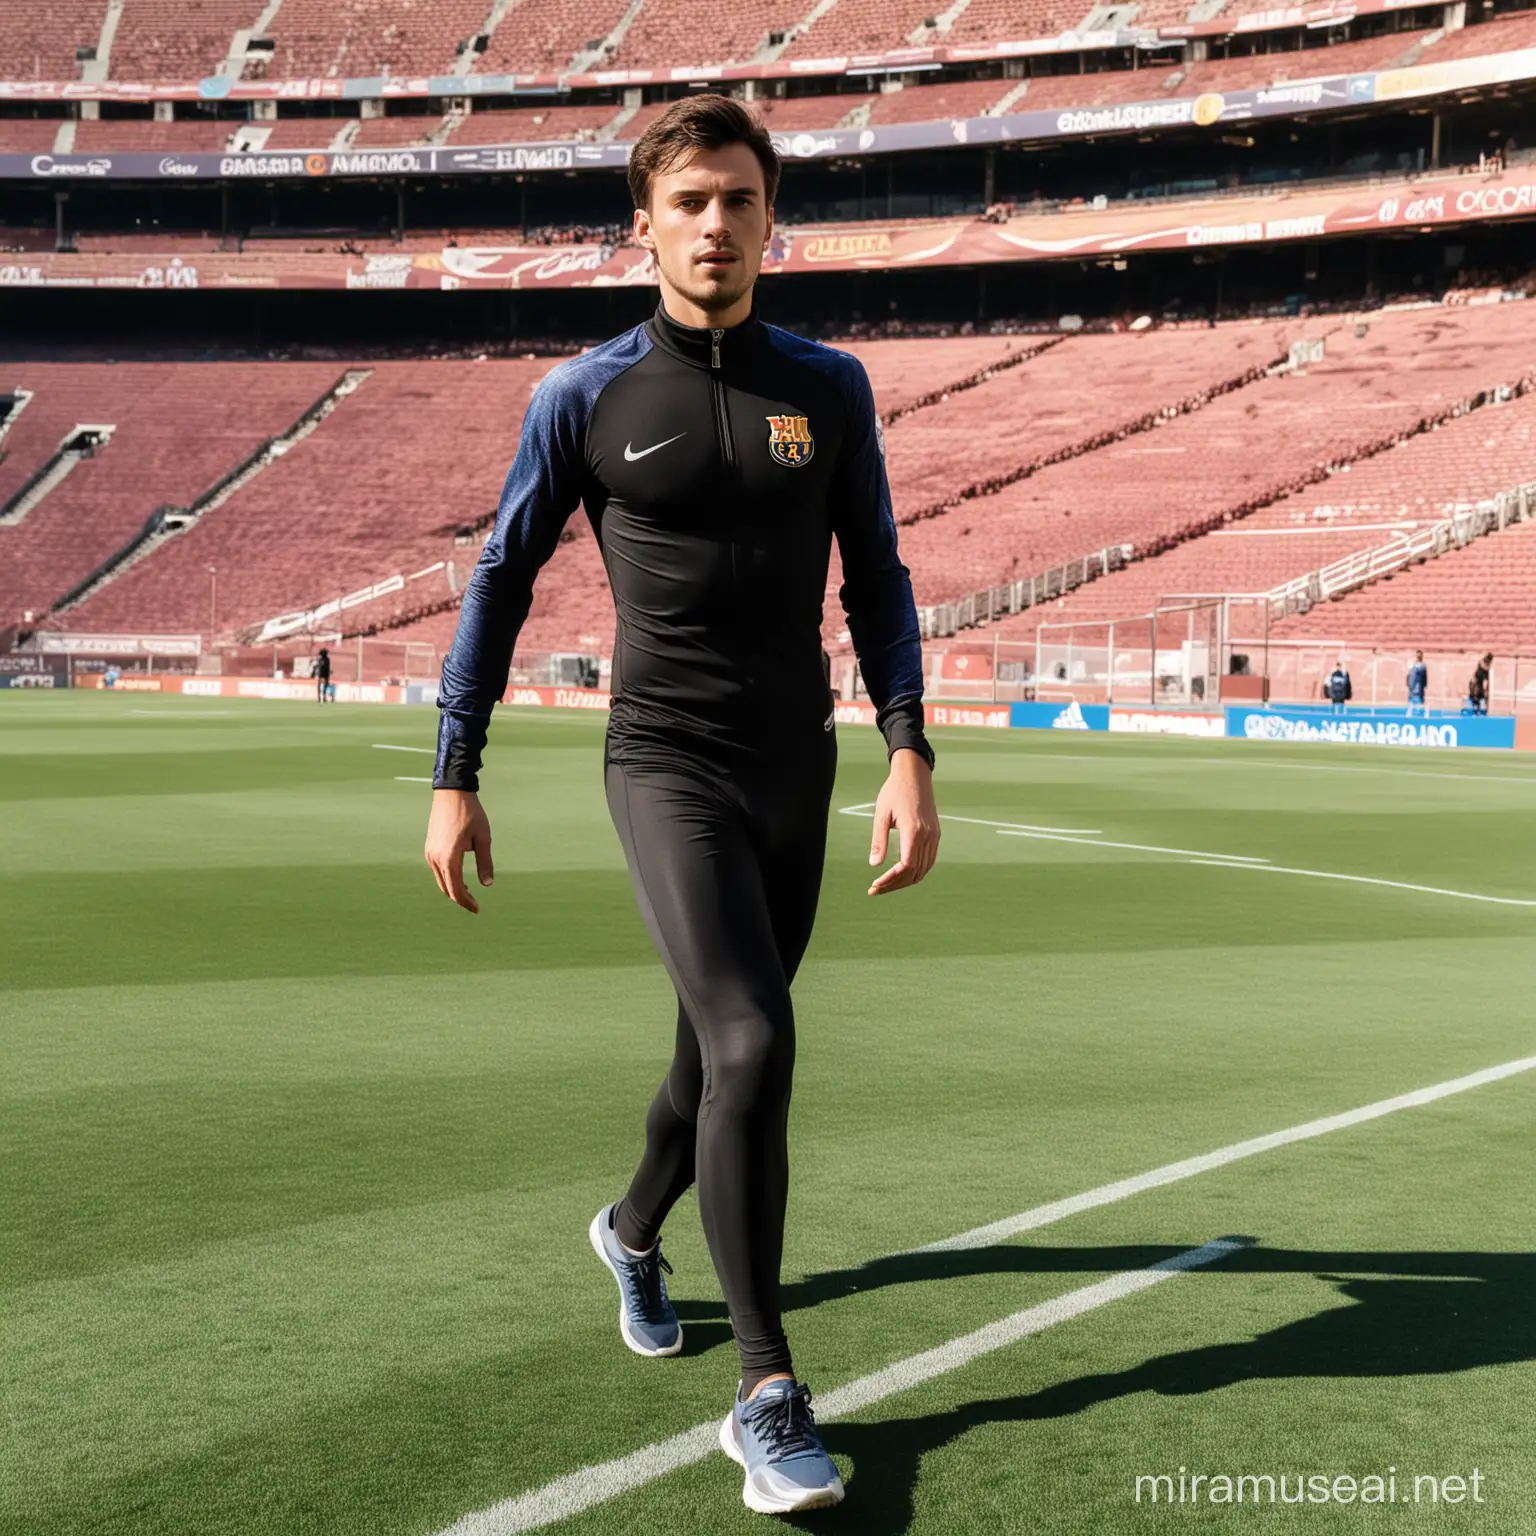 A young man person jogging in a hot summerday in Barcelona Camp nou While wearing a skin tight fleece Chelsea football  high neck collar catsuit with a zipper through The crotch.